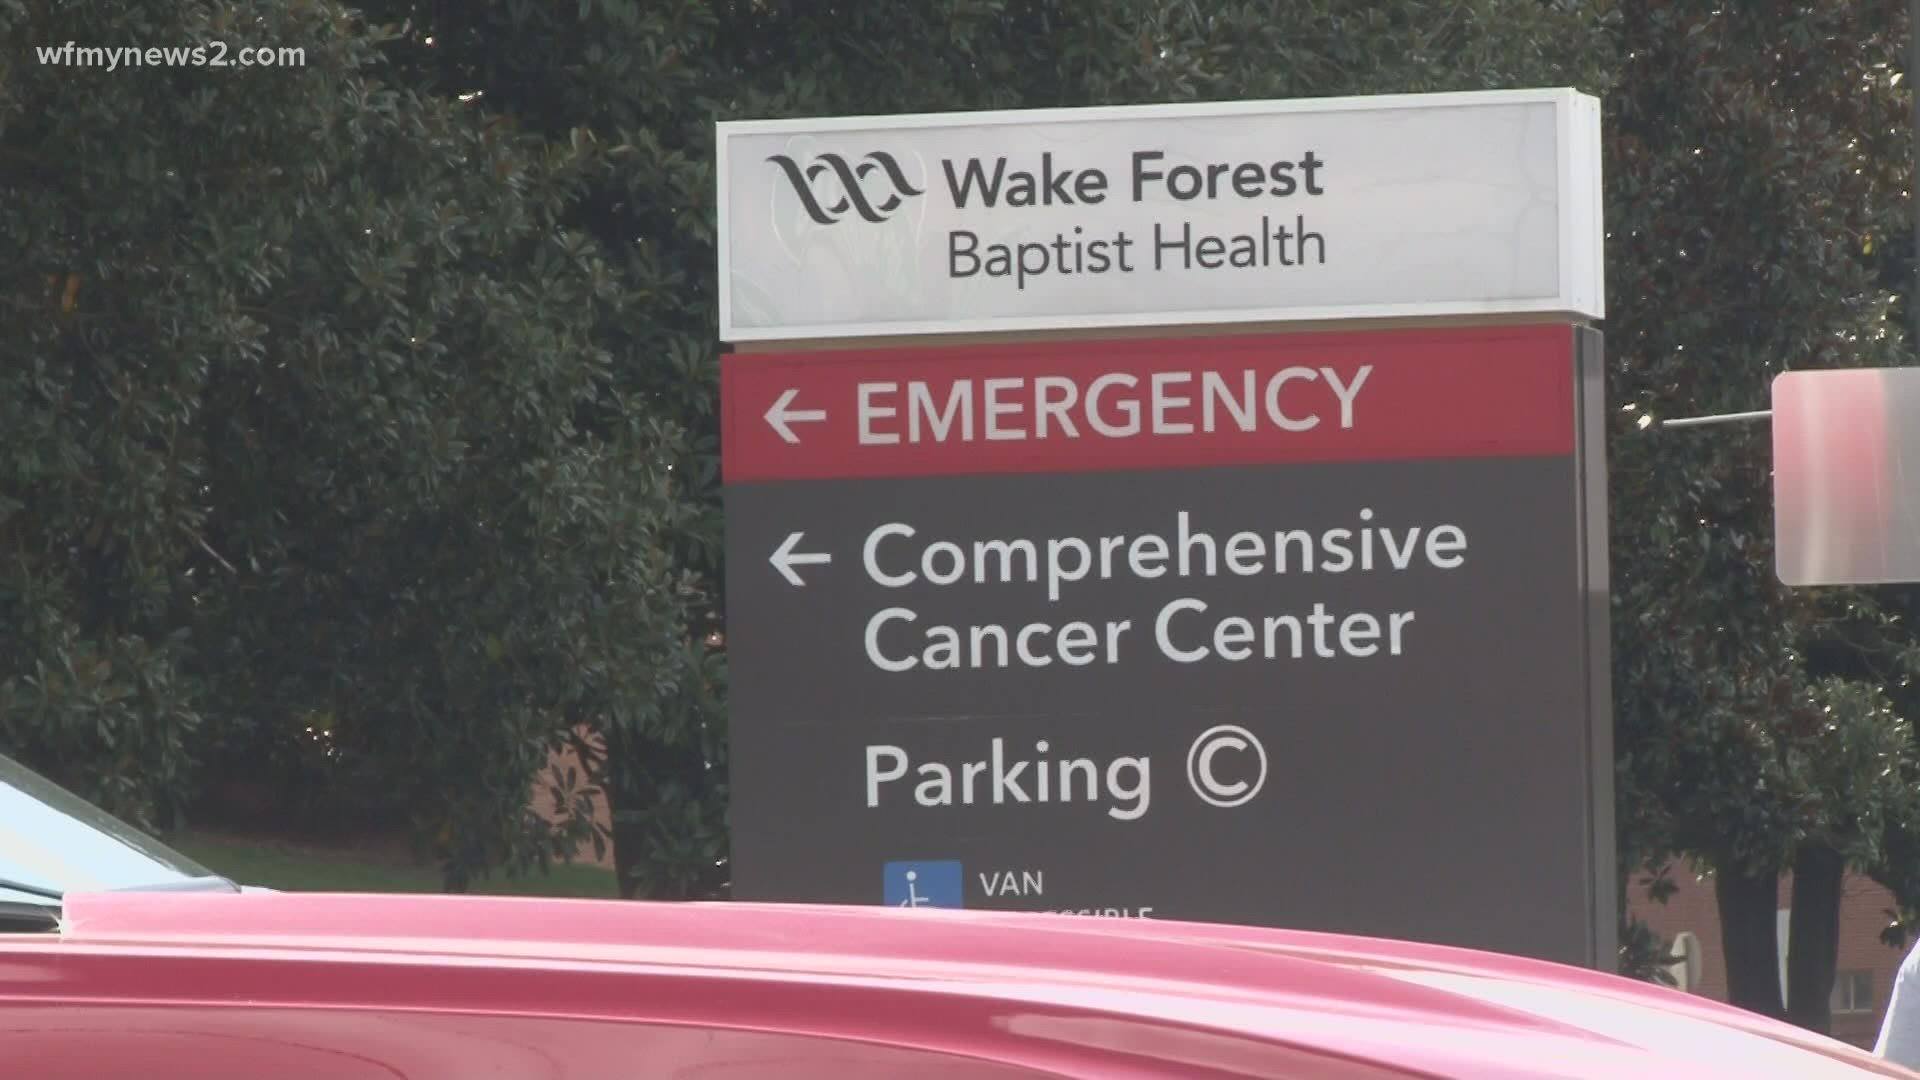 Triad hospitals are reminding communities when they should go to emergency rooms to help control wait times.